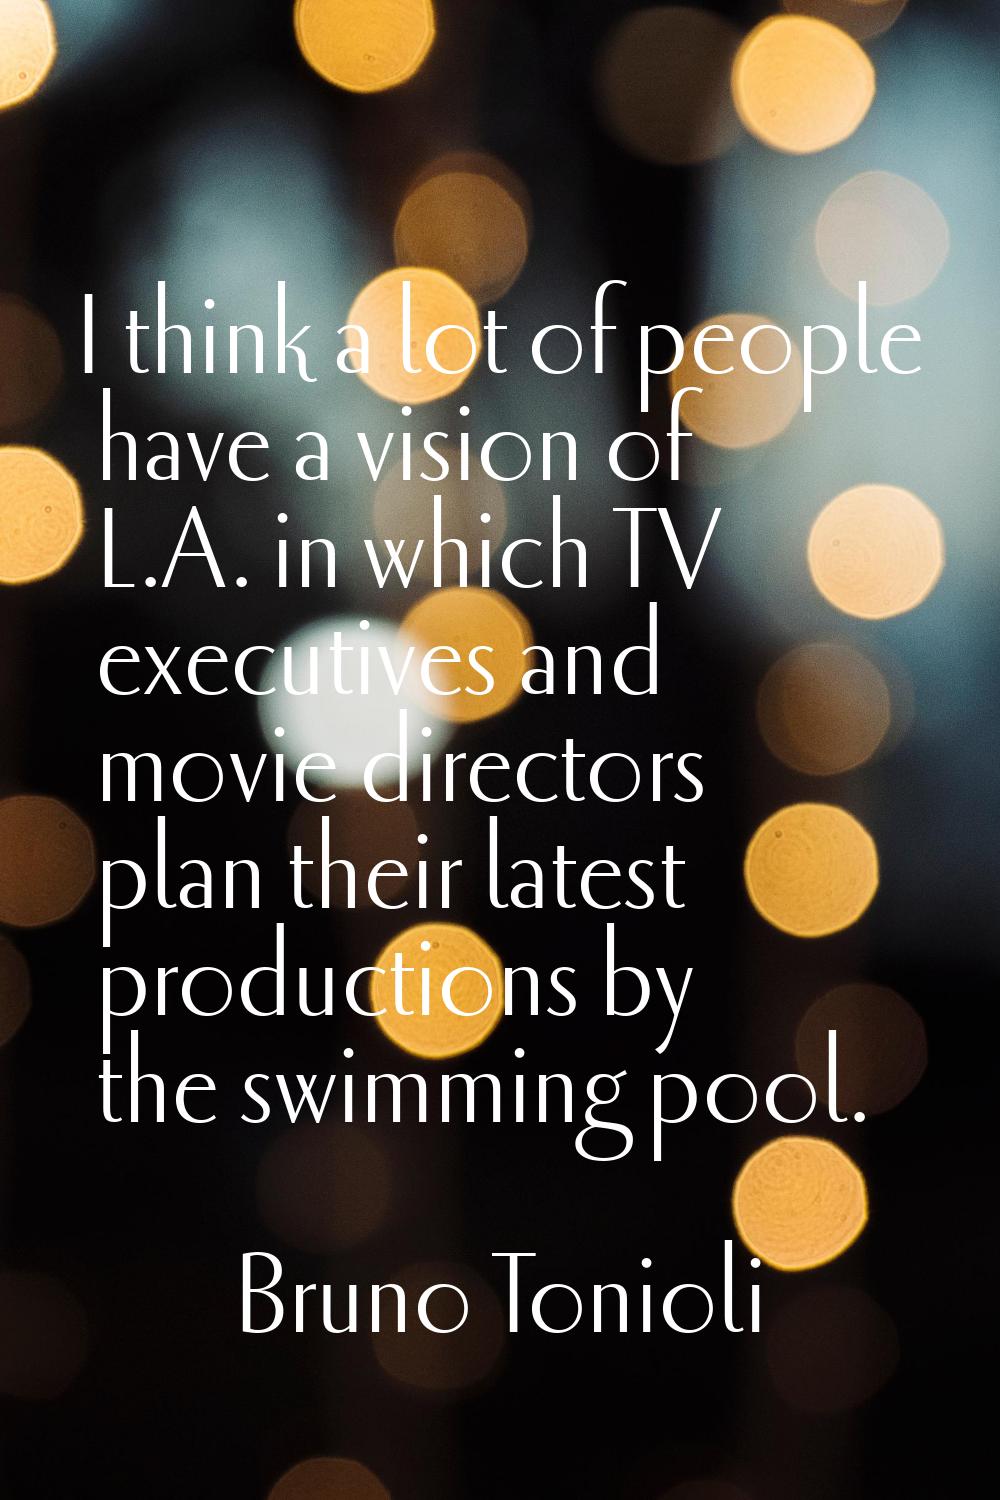 I think a lot of people have a vision of L.A. in which TV executives and movie directors plan their